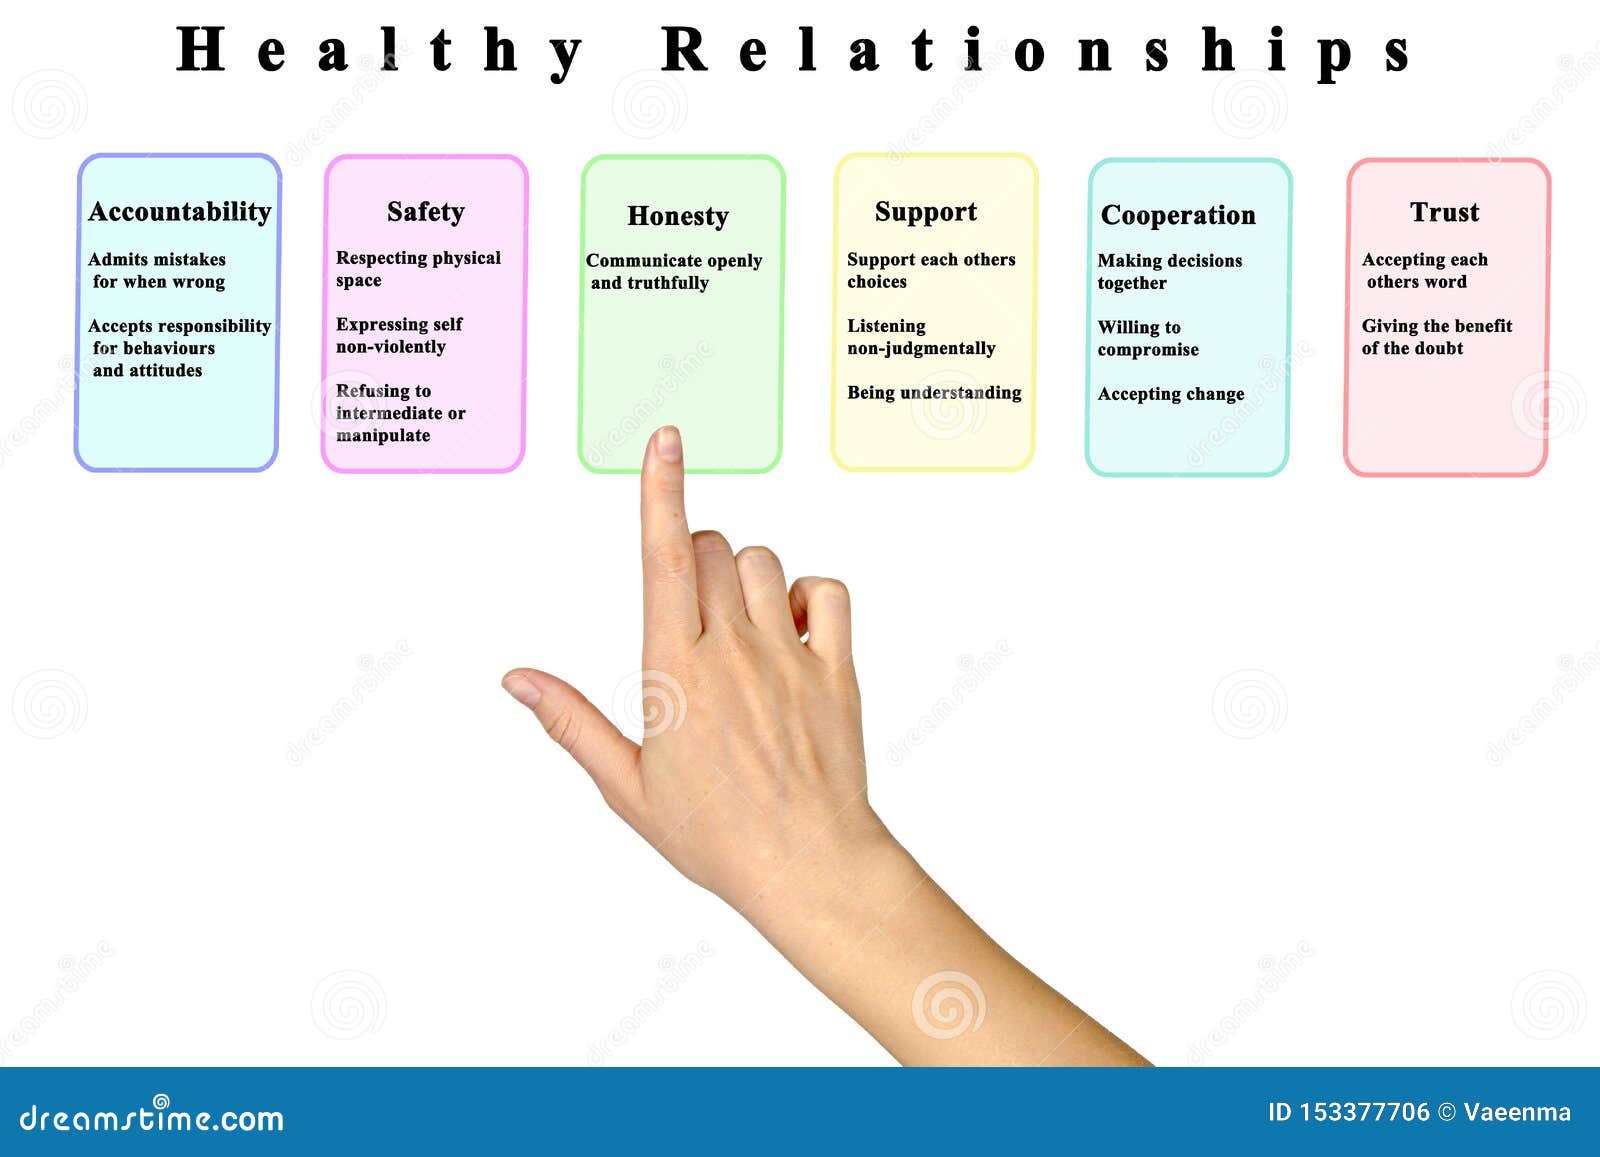 building healthy relationships